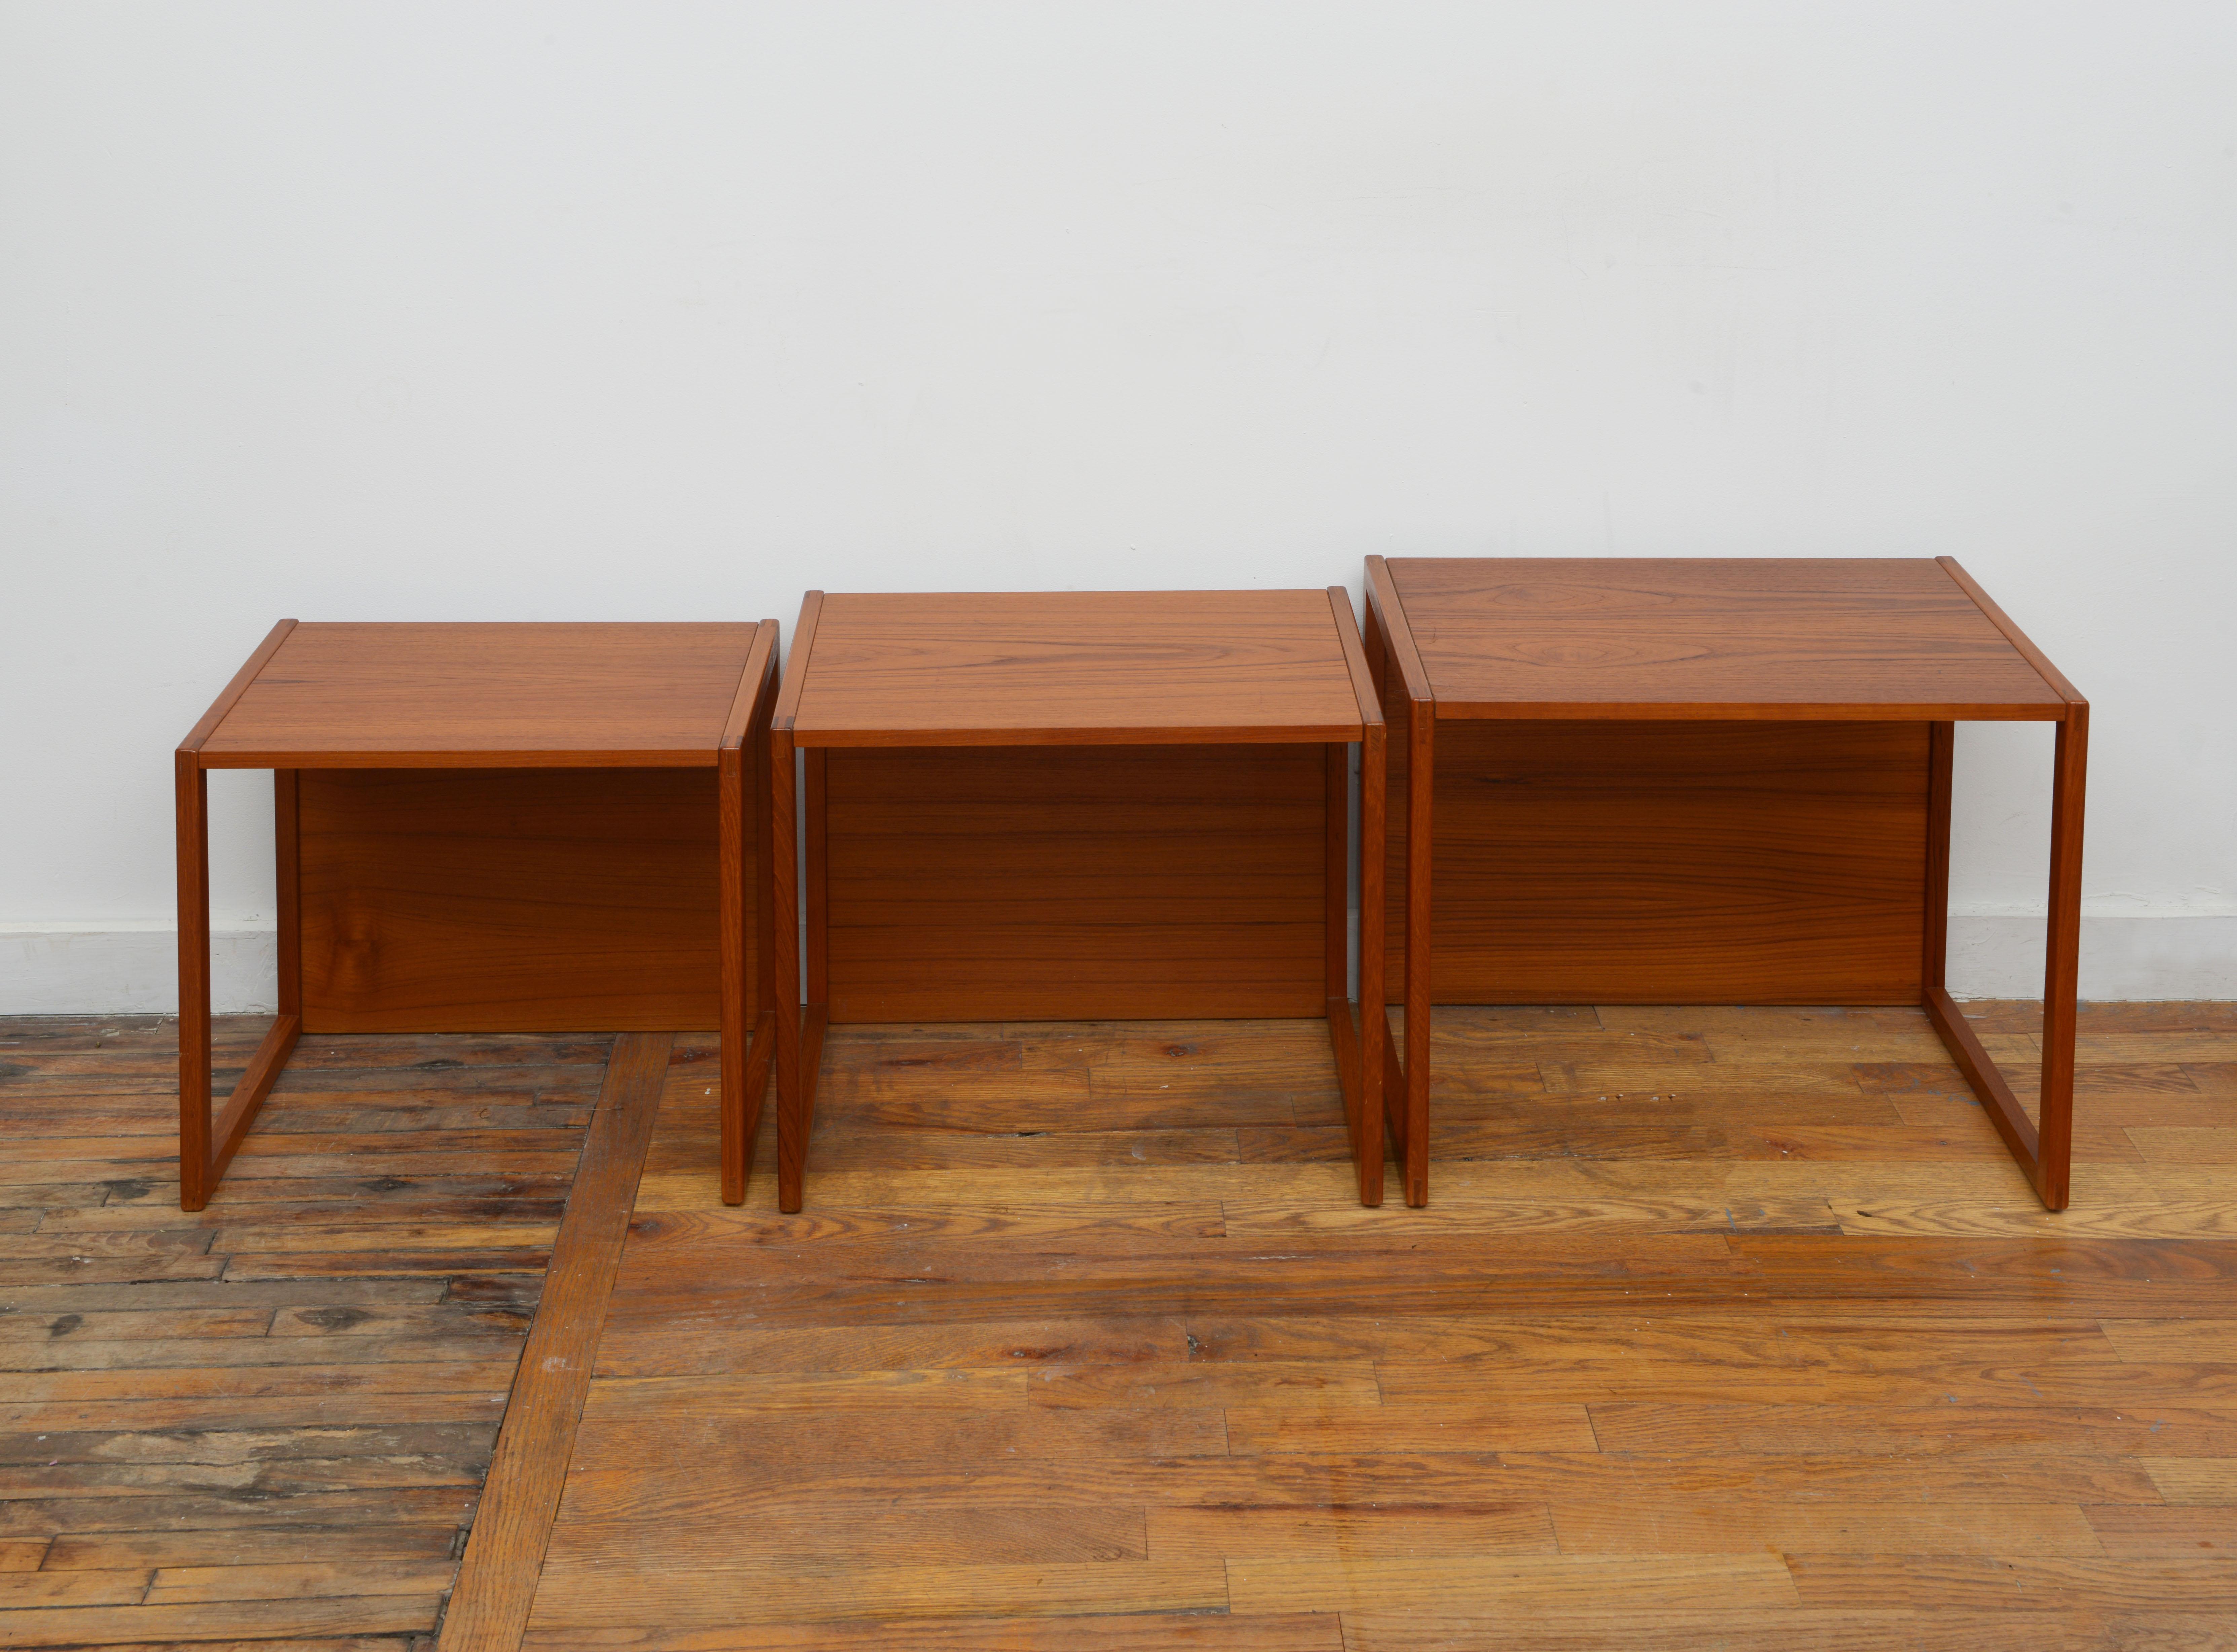 A beautiful set of 3 Danish modern nesting tables by NH Collection 1960s. Signed with label and made in Denmark stamp on underneath one of the tables. These tables feature an interesting design with a top and backside fully covered in teak. They can